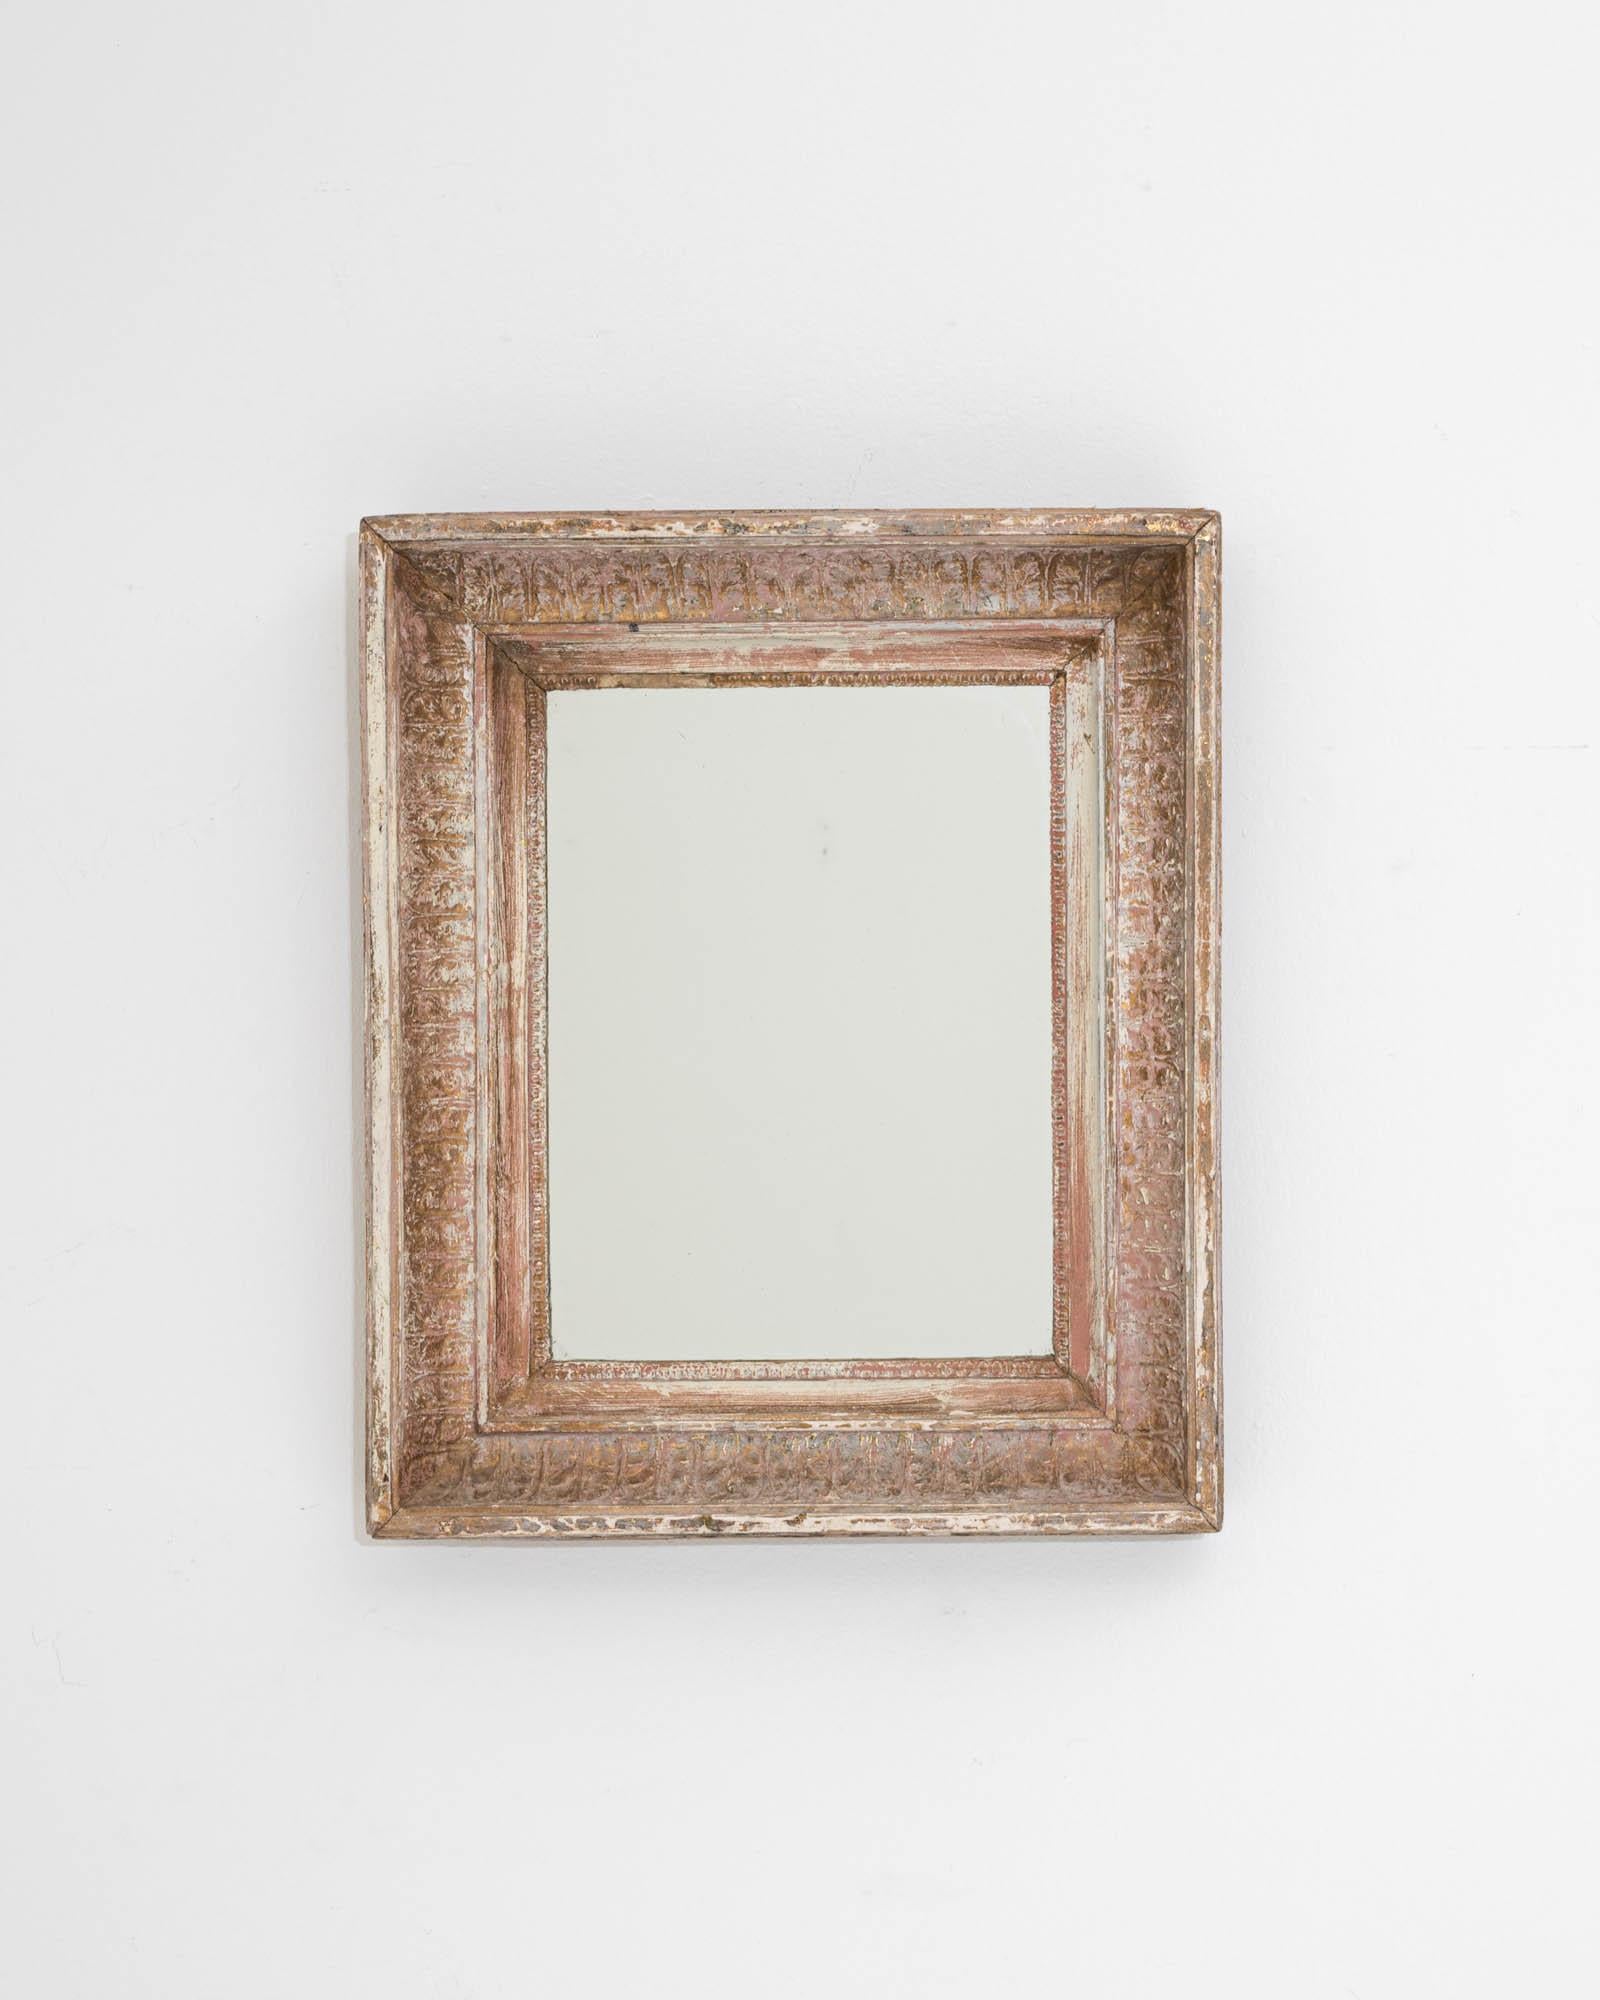 A wooden mirror created in 19th century France. With rustic yet elegant patterned wood and an attractively shaped frame, this mid-sized mirror offers a refined composition for reflection. The time-touched wood, mesmerizingly hand-carved with